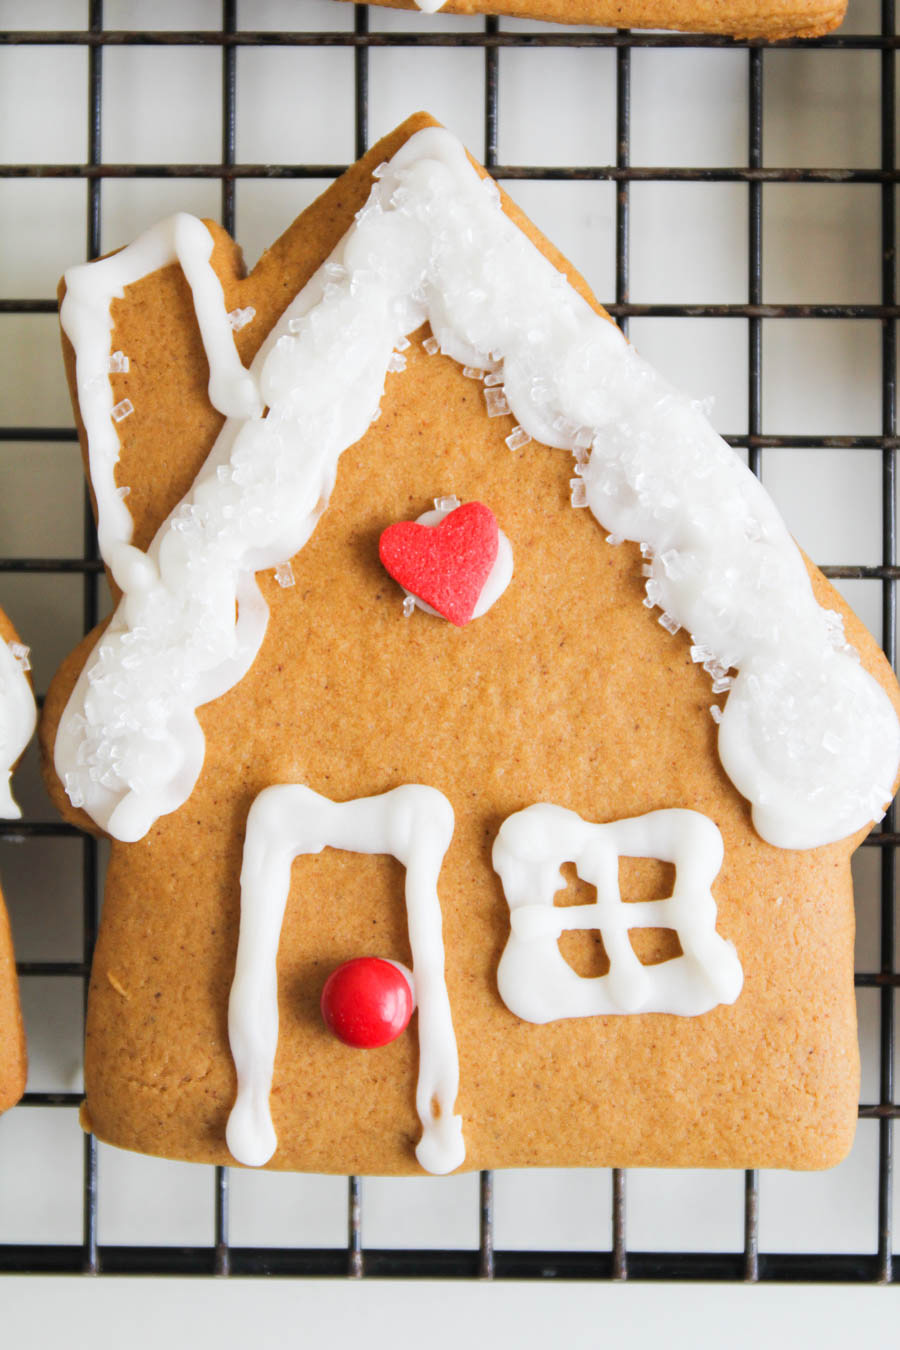 These basic gingerbread cookies are soft but sturdy and perfect for decorating!